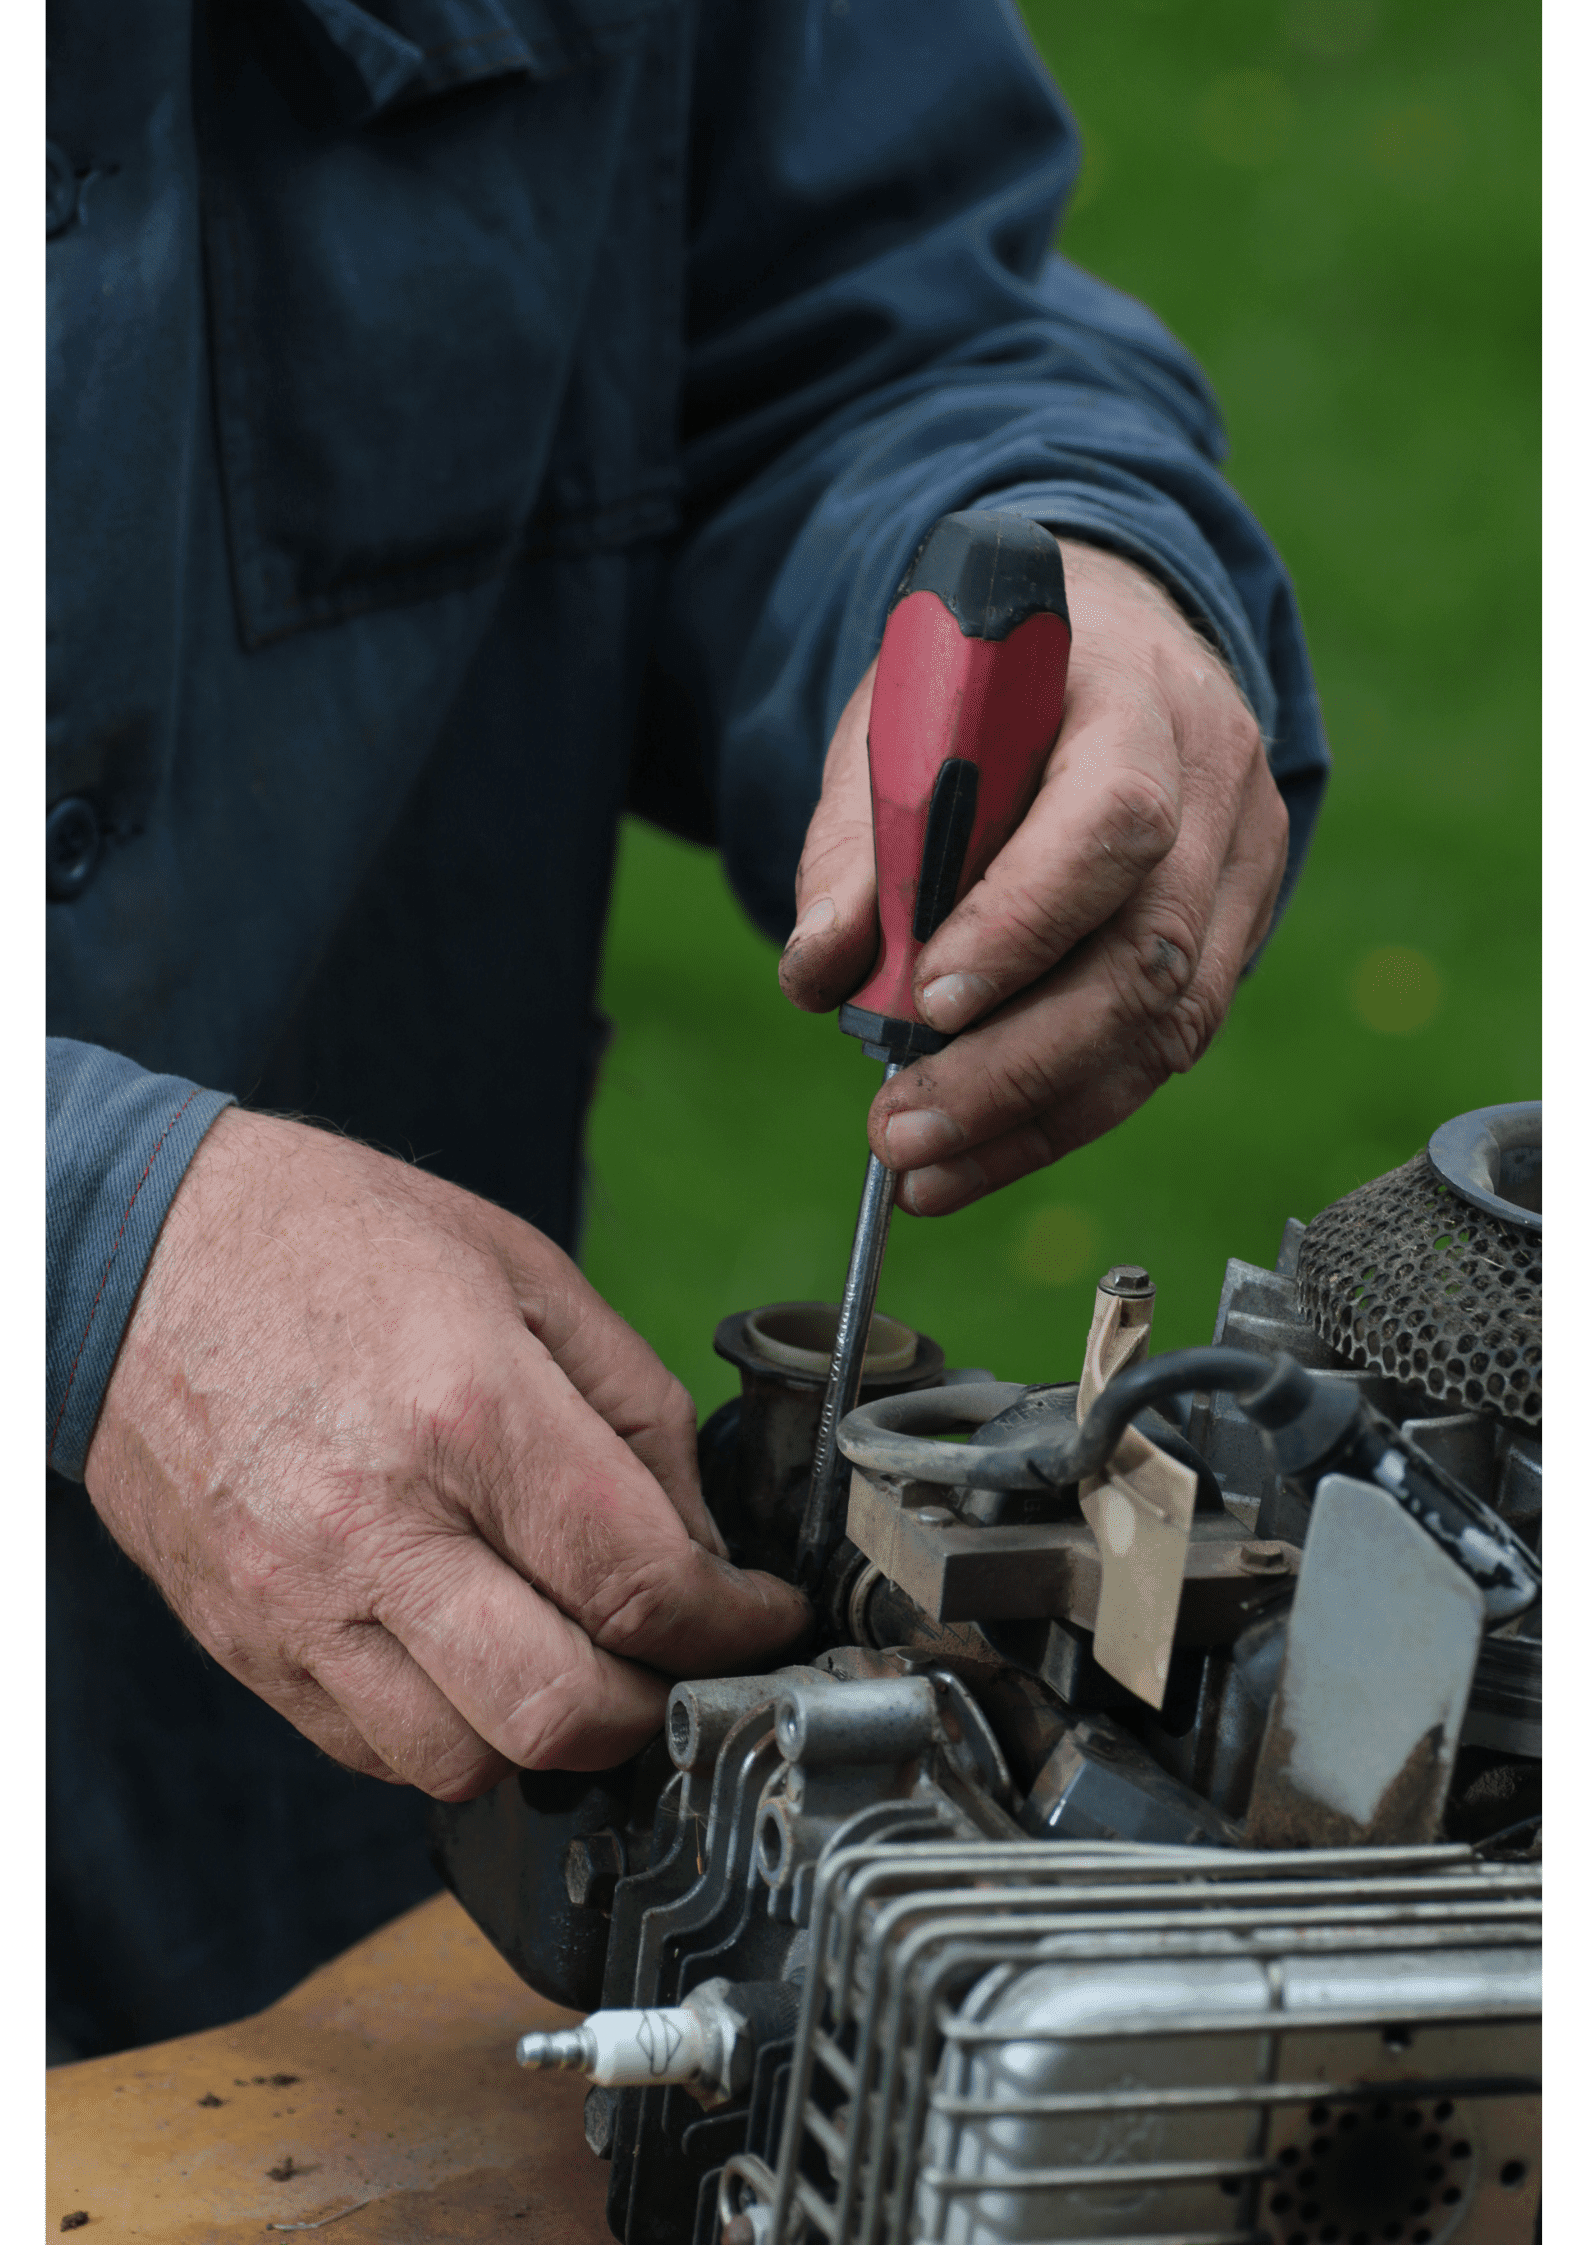 How to Install Side Discharge on Lawn Mower